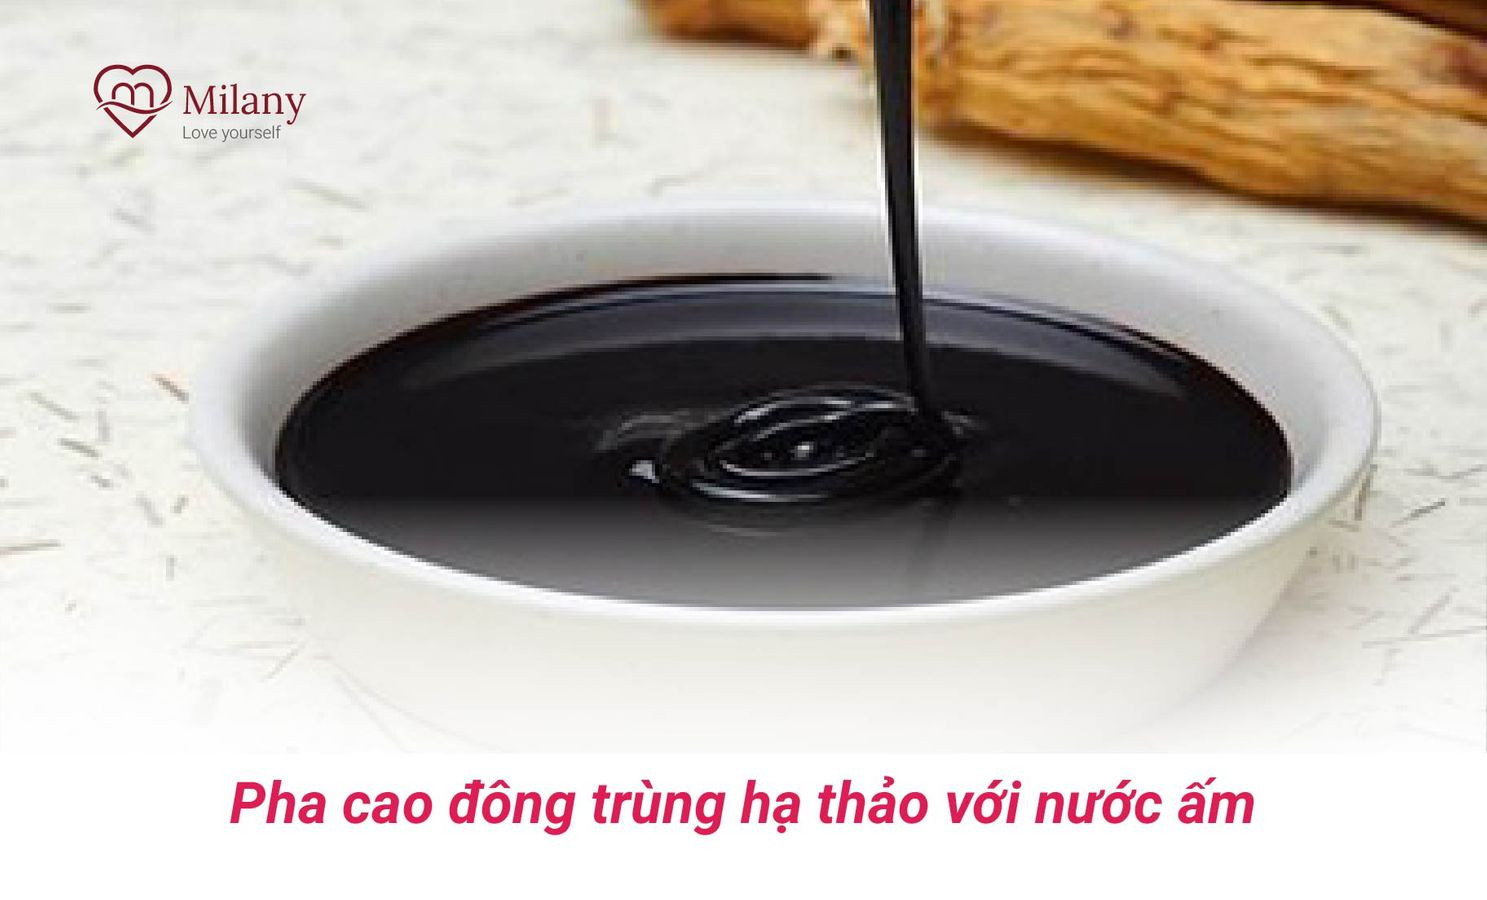 pha dong trung ha thao voi nuoc am